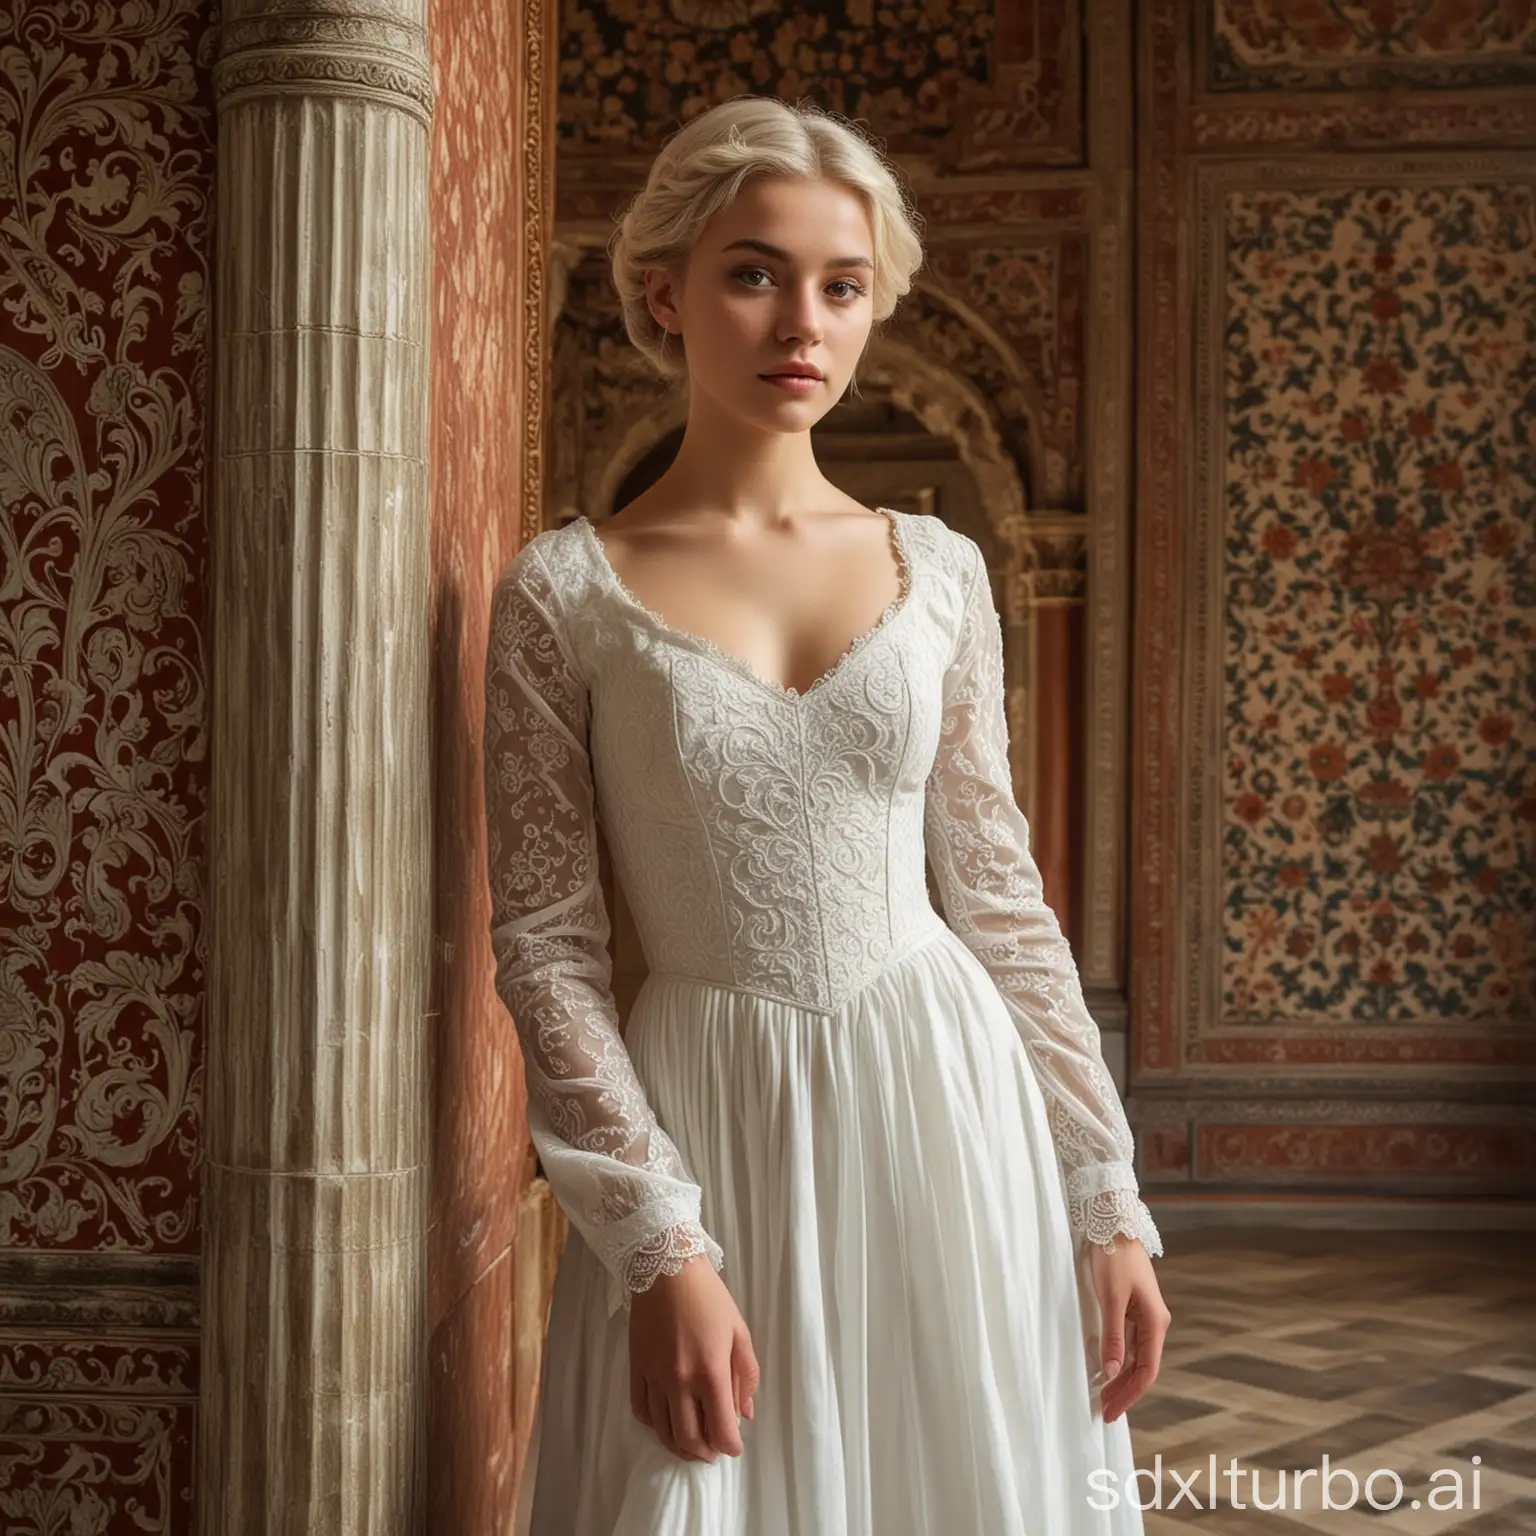 The image captures a beautiful woman with short blonde hair wearing a 15th century dress stained with blood on sleeves neckline and her face in an elegant setting. The background is made up of intricately designed walls and  classics, giving off a magnificent atmosphere. Specific items or elements: Person: Wearing a stunning pure white dress stained with blood , the hem gracefully extends to the floor. The dress features a long sleeve design , accentuating the elegance of the outfit. To protect privacy, the person's face is obscured. Dress Details: Made of  fiber, it reflects light beautifully. The waist of the dress is pleated, highlighting the silhouette of the wearer. Shoes: Paired with delicately designed open-toe high heels, they complement the fashion of the dress. Background environment: A wall with text patterns serves as the background, increasing the grandeur of the scene. You can see a gorgeously decorated classically designed table, with a vase full of plants on top. Floor: The glossy floor reflects some elements of the room, making the overall presentation more perfect.

Woman: the woman is a young teenager of 18 years old with short white hair and very beautiful, perfect face, perfect nose, perfect eyes.
thick thighes
Medium plane